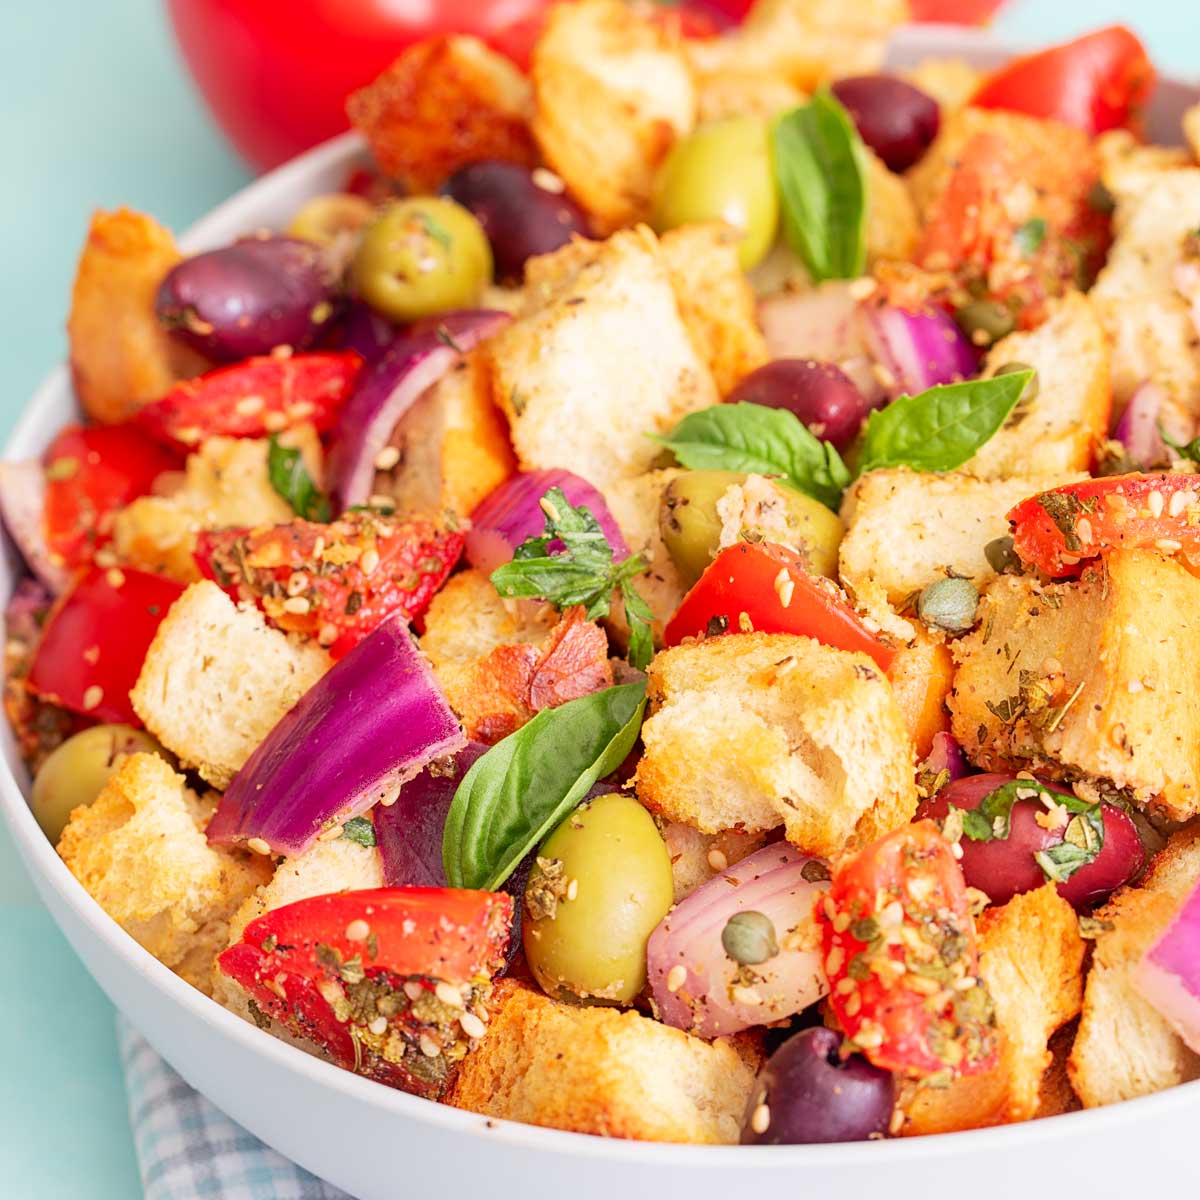 Front viewo of bread salad with olives, tomatoes, bread, onions and capers.